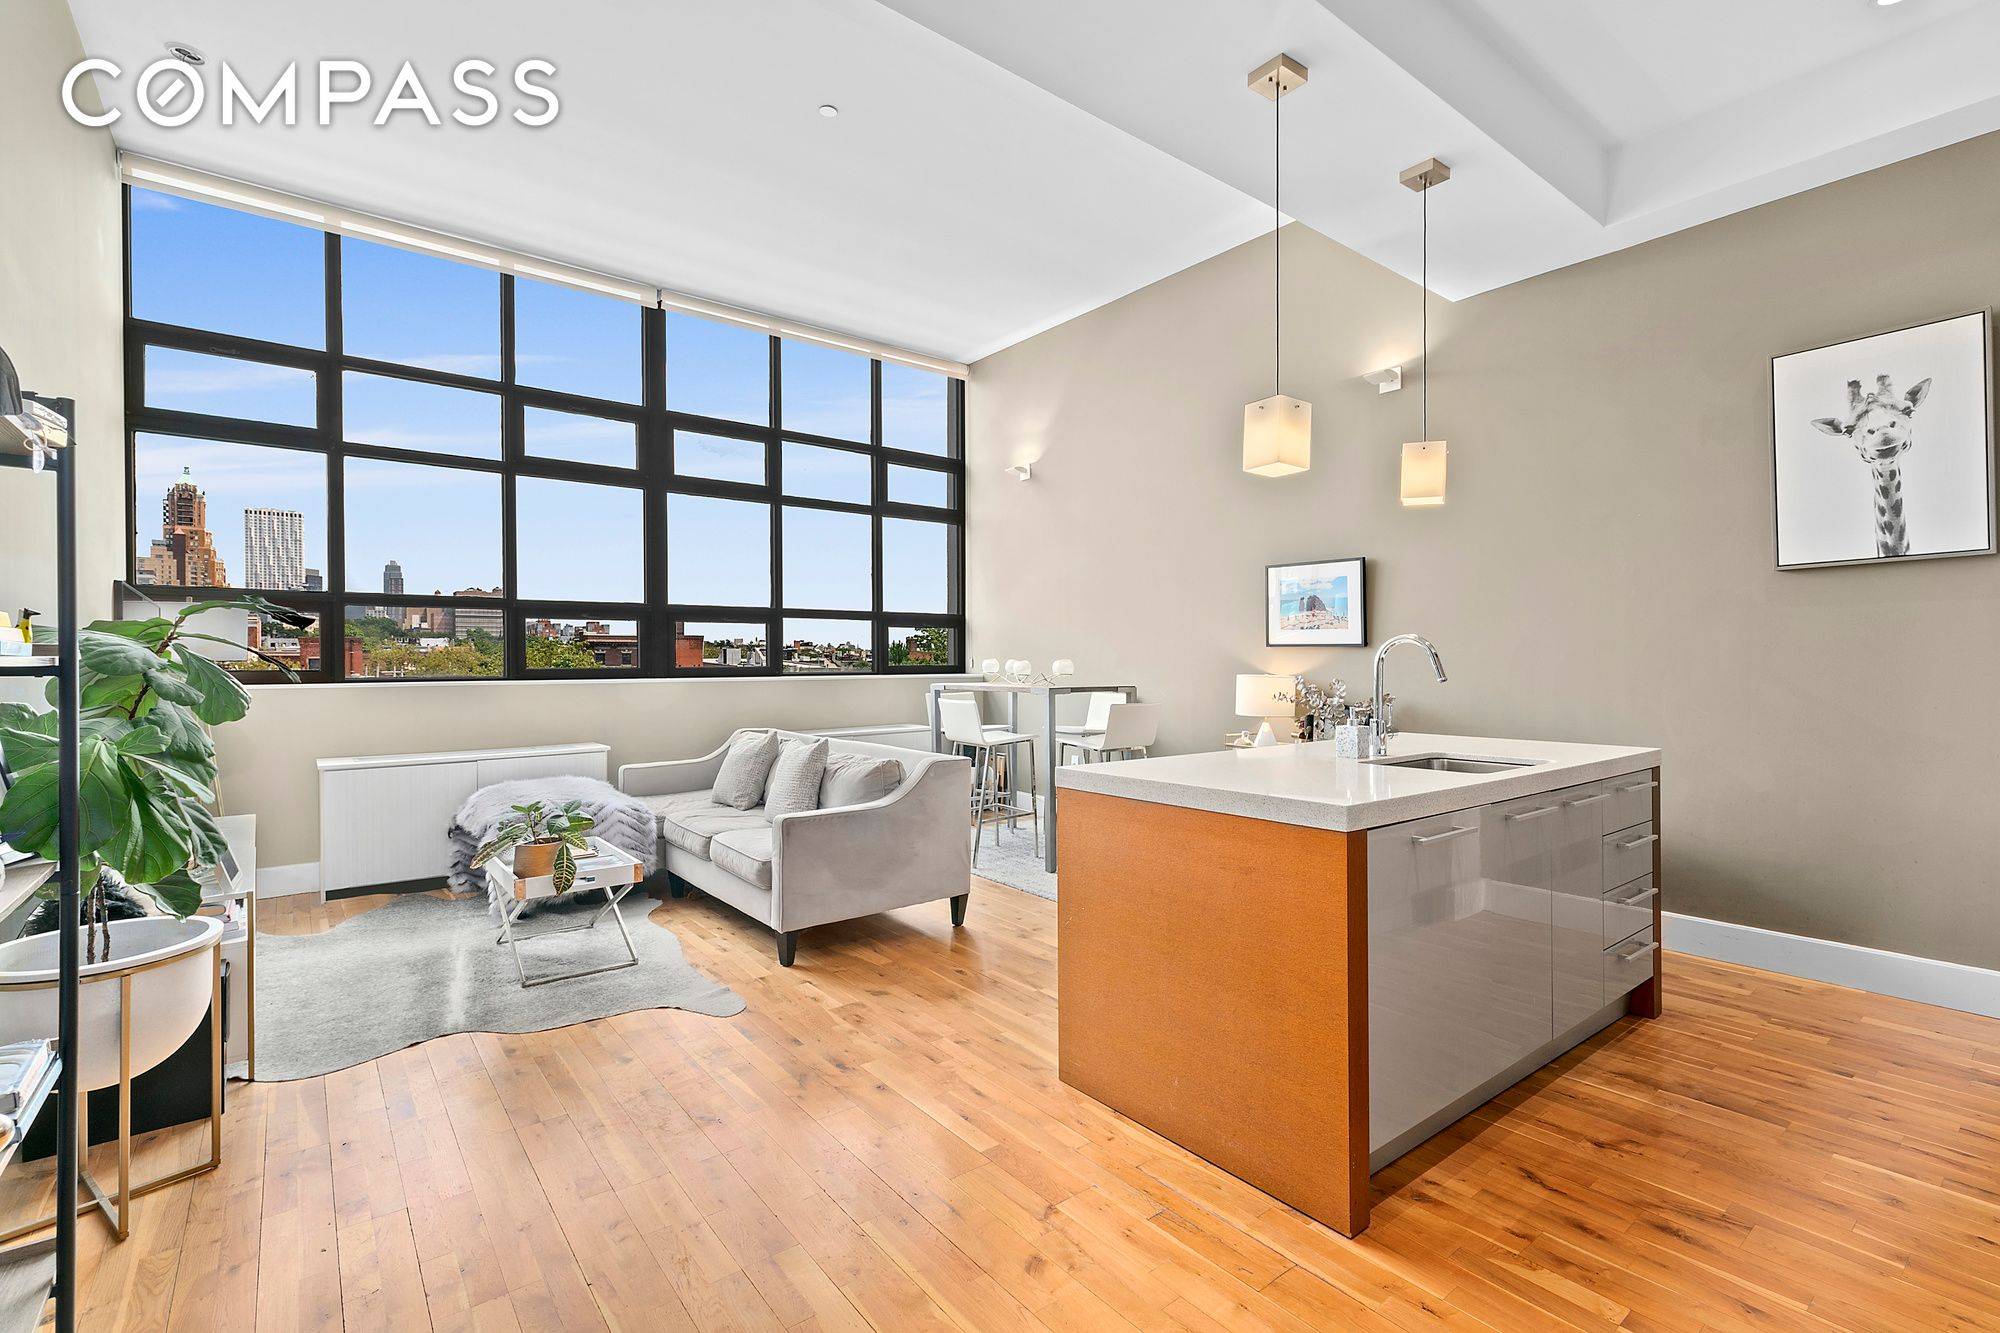 Welcome to One Brooklyn Bridge Park located at 360 Furman St in one of Brooklyn s premiere full service condominiums in Brooklyn Heights.